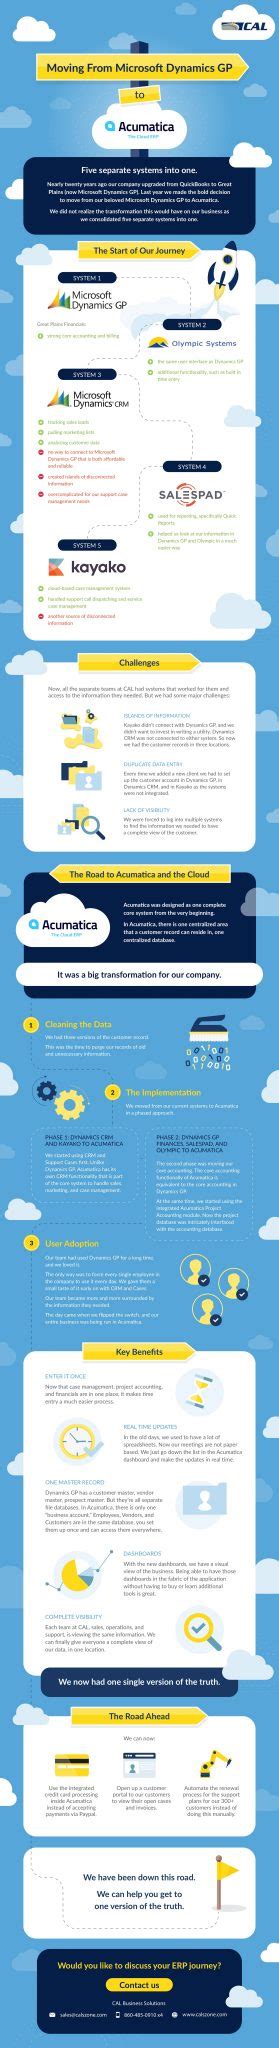 Moving From Microsoft Dynamics Gp To Acumatica Cloud Erp